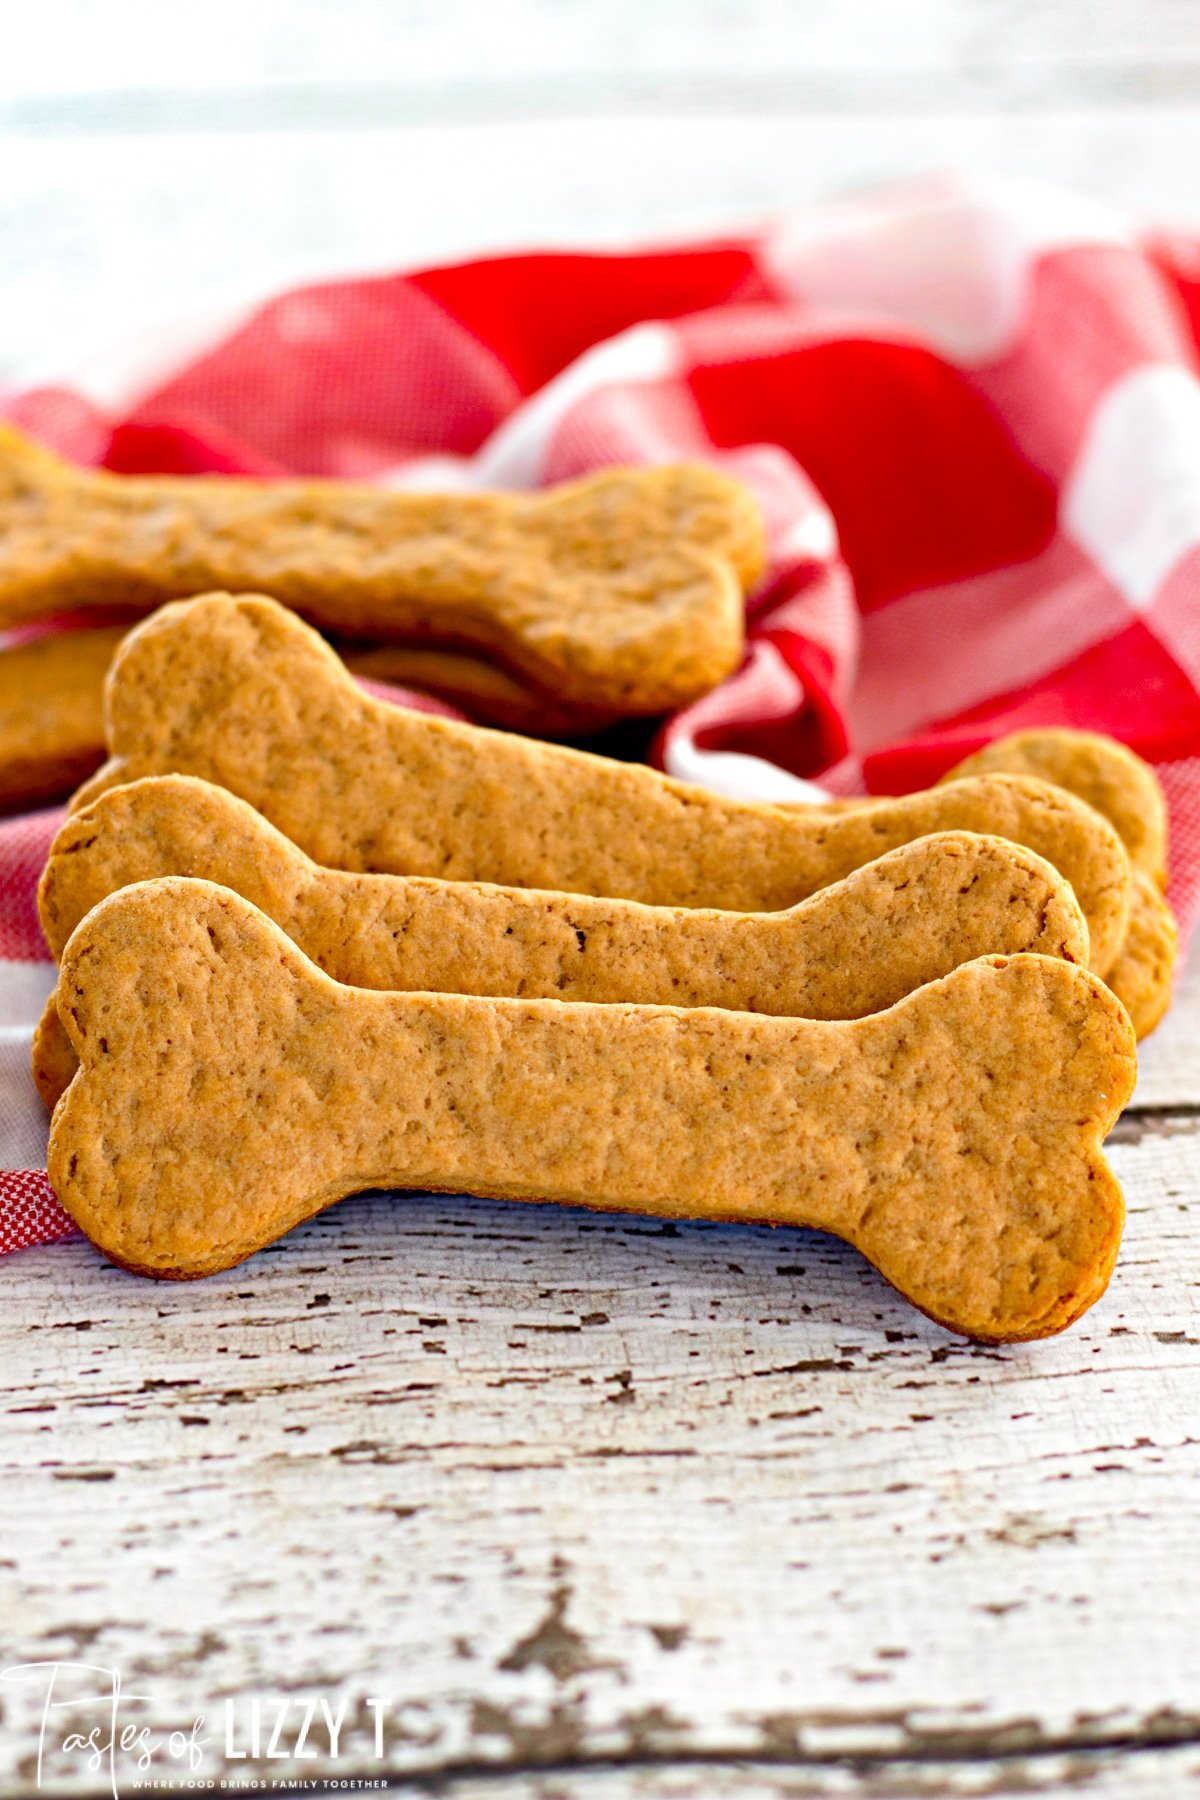 Oozies Dog Biscuits Wholesale Outlet, Save 55% | jlcatj.gob.mx